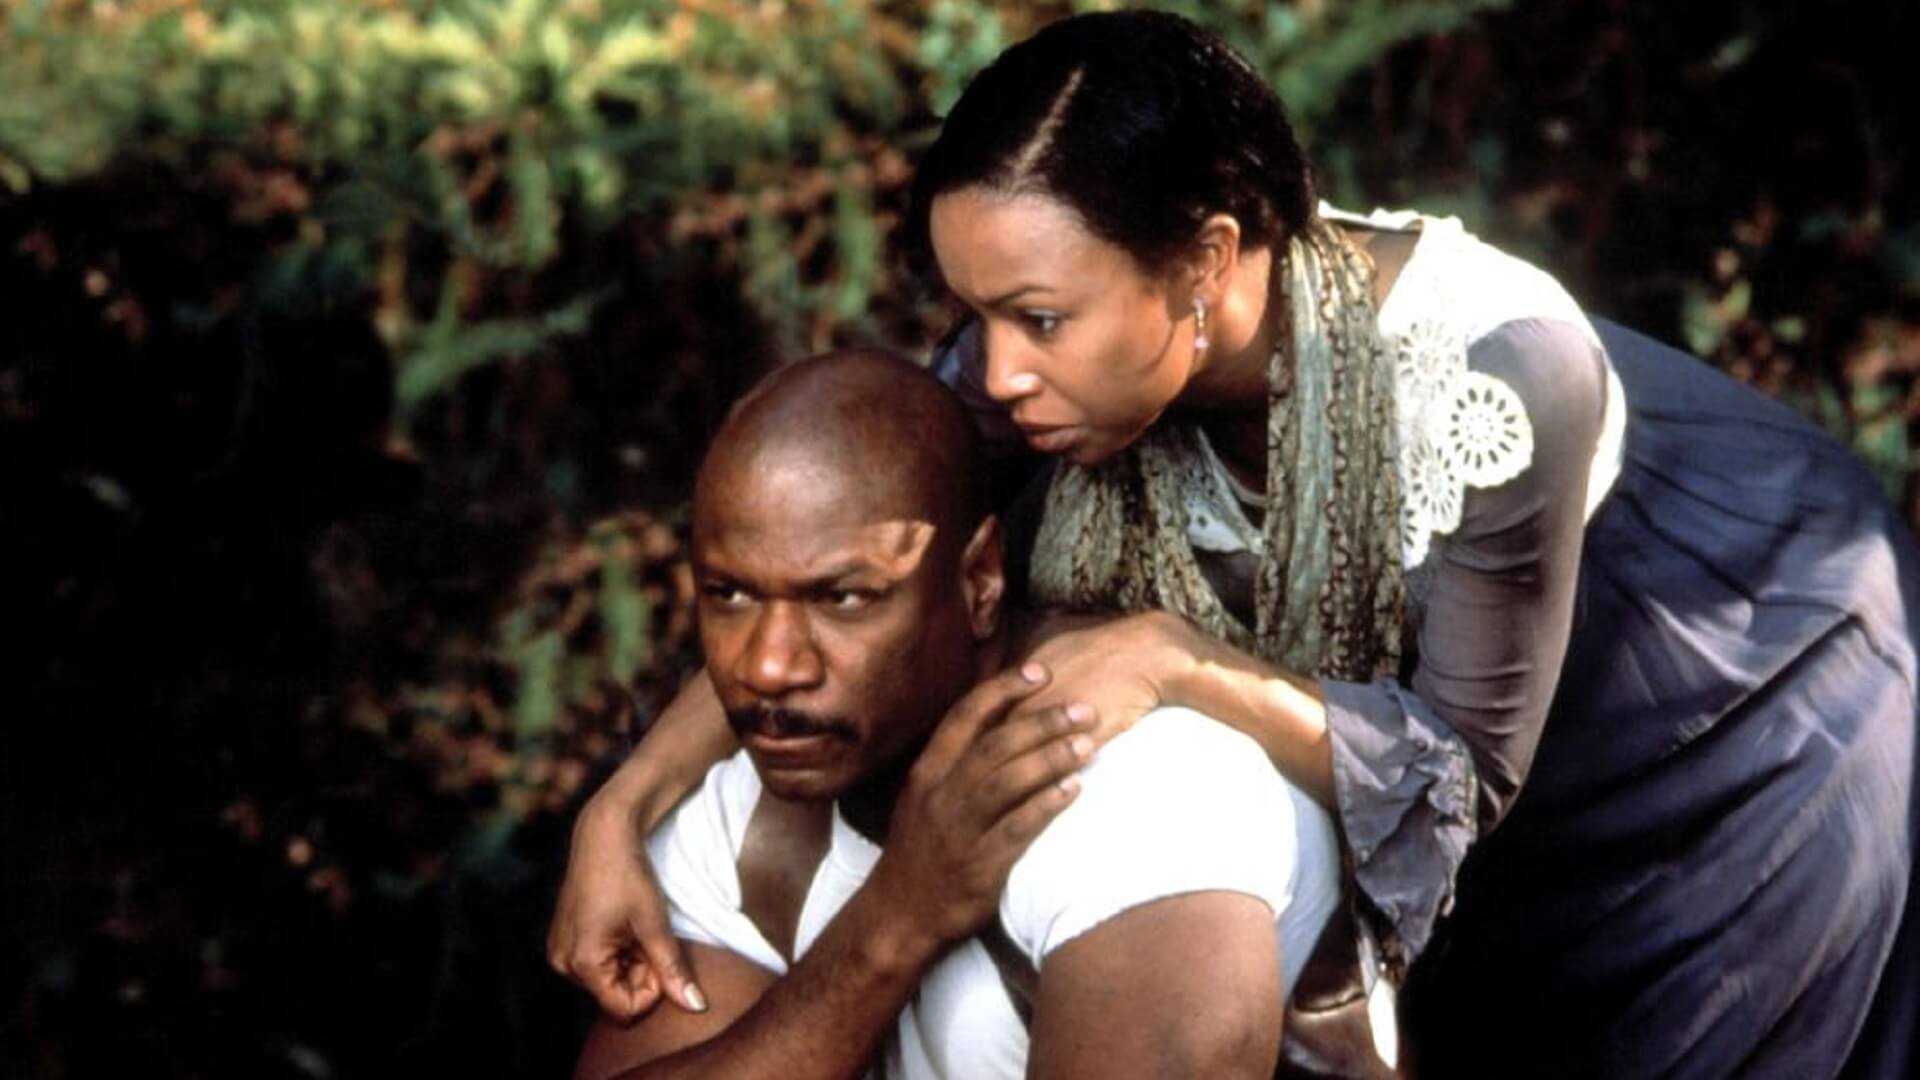 Mann (Ving Rhames) being comforted by Aunt Sarah (Esther Rolle) in 'Rosewood'